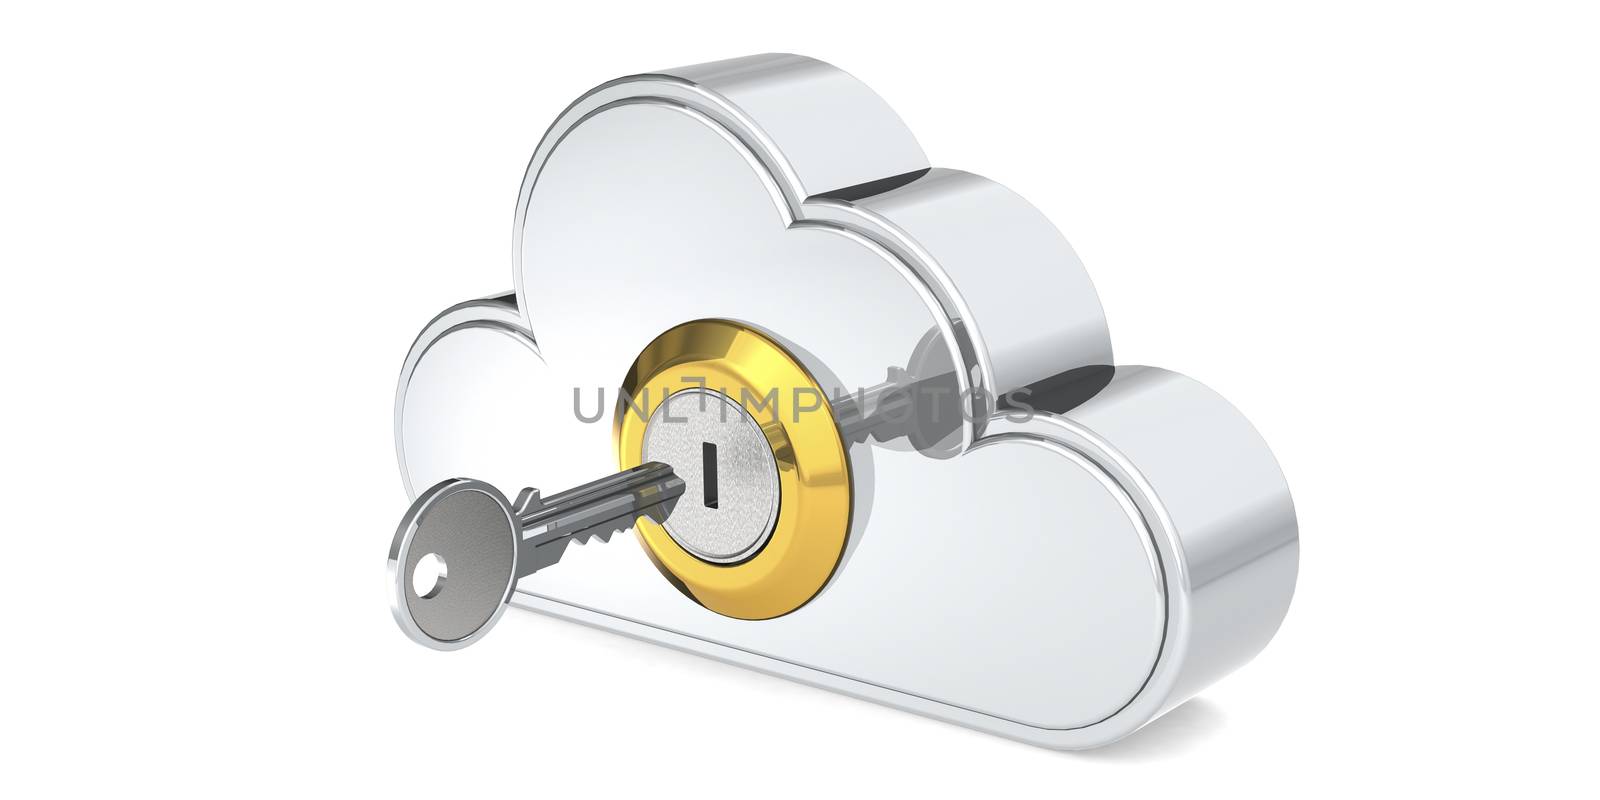 Security concept of cloud computing with metal key, 3D rendering